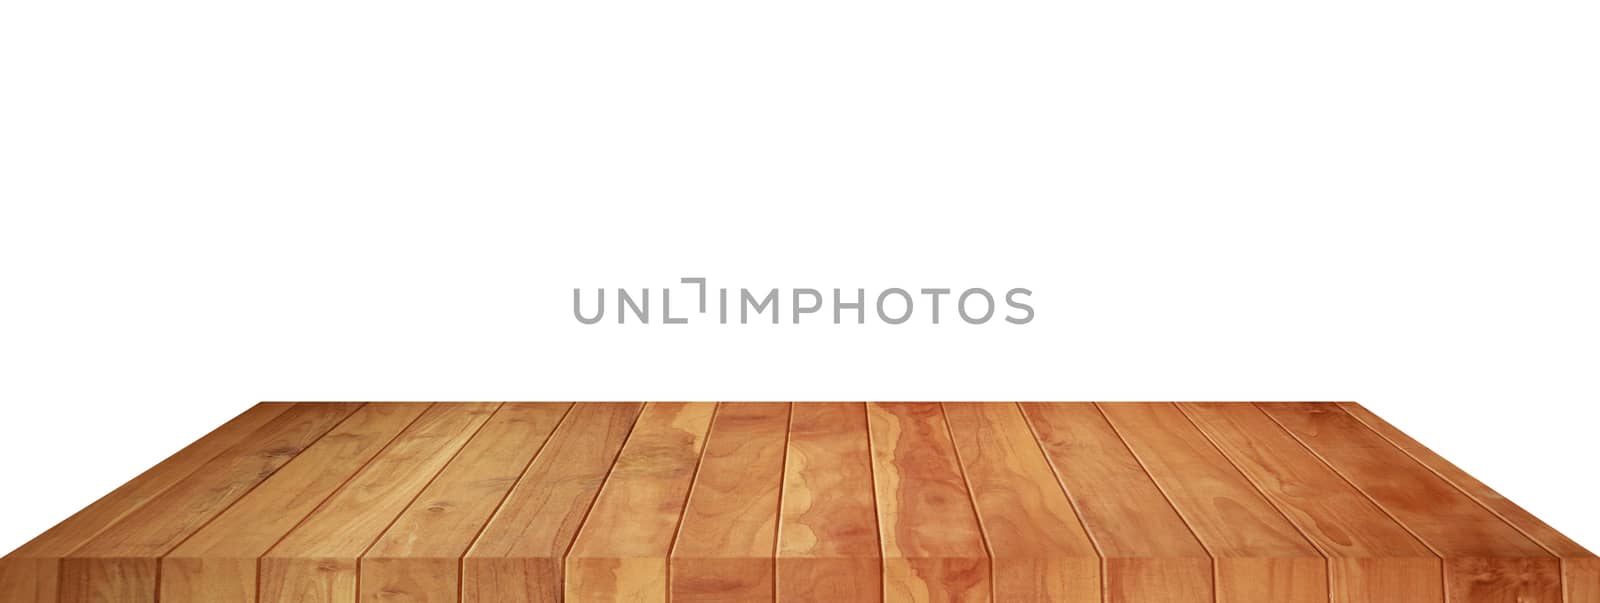 Empty brown wood floor object on a white background